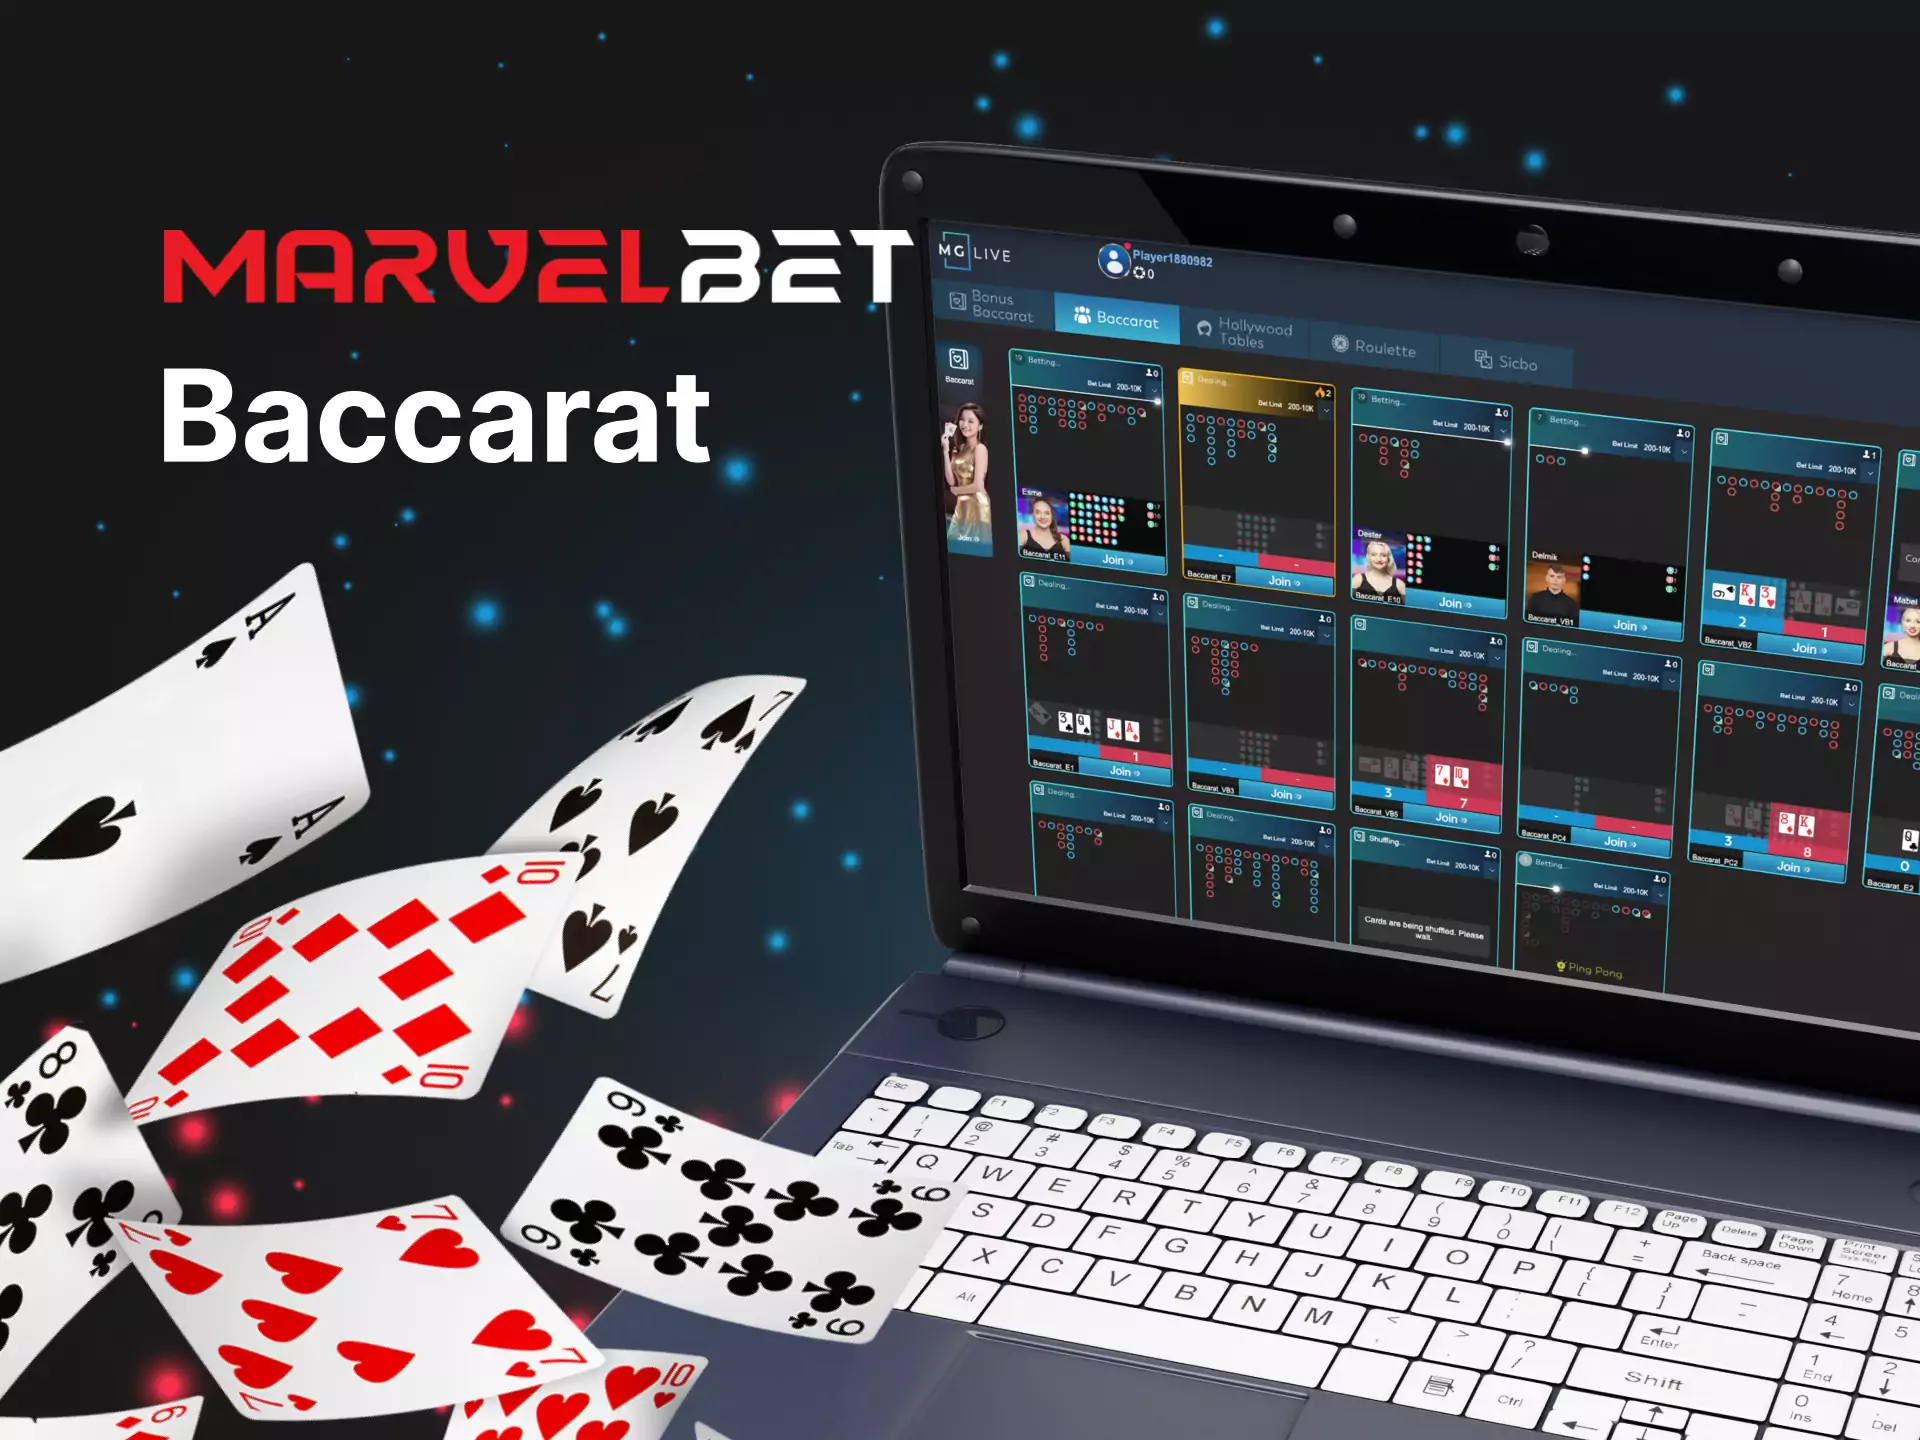 Baccarat is a traditional card game that you can play in the Marvelbet Live Casino.